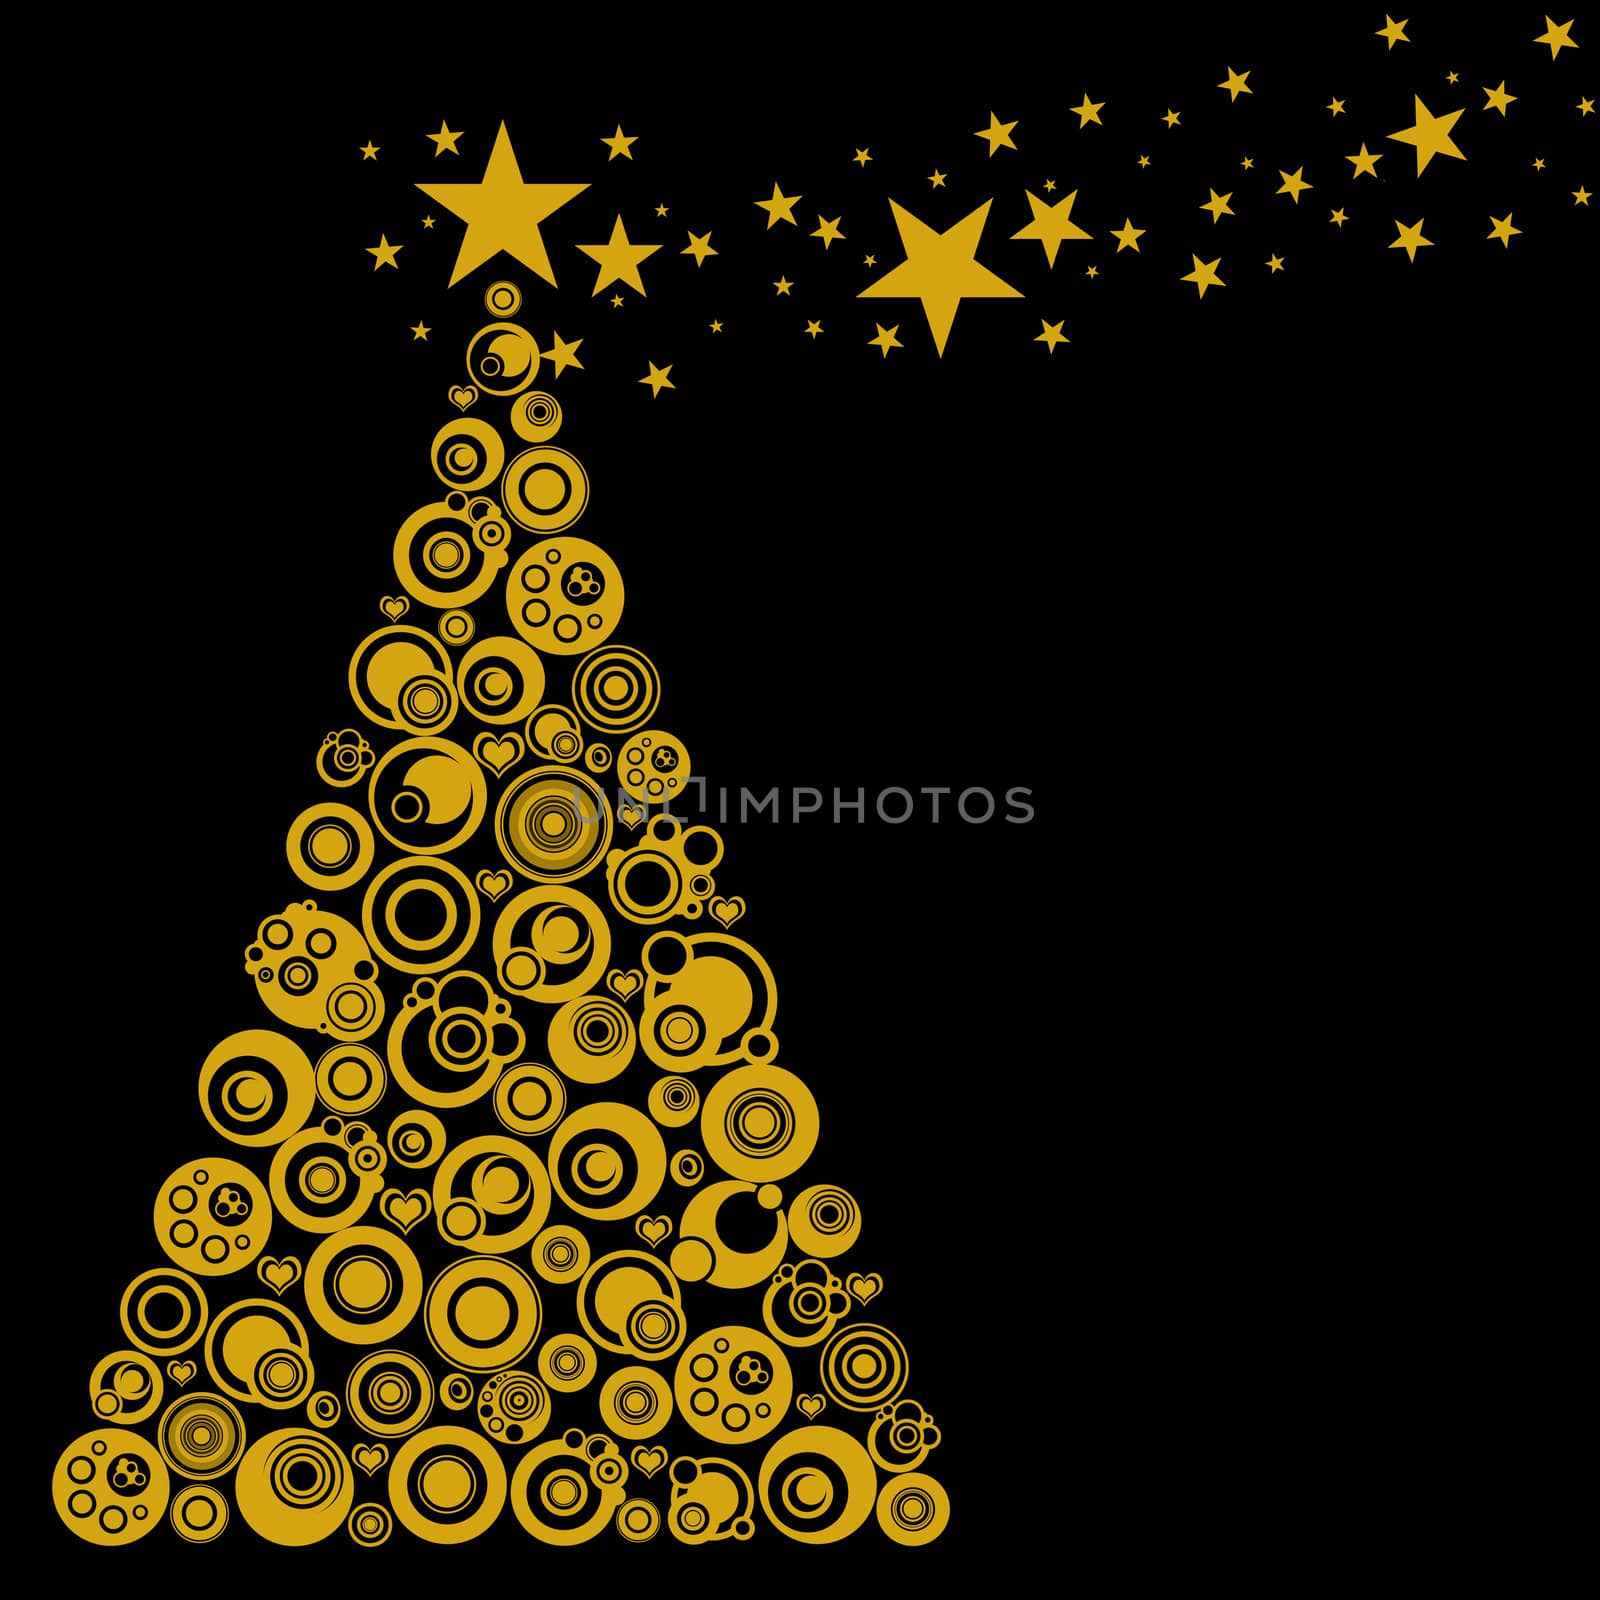 Abstract Christmas Tree with Circles Stars and Hearts by Davidgn